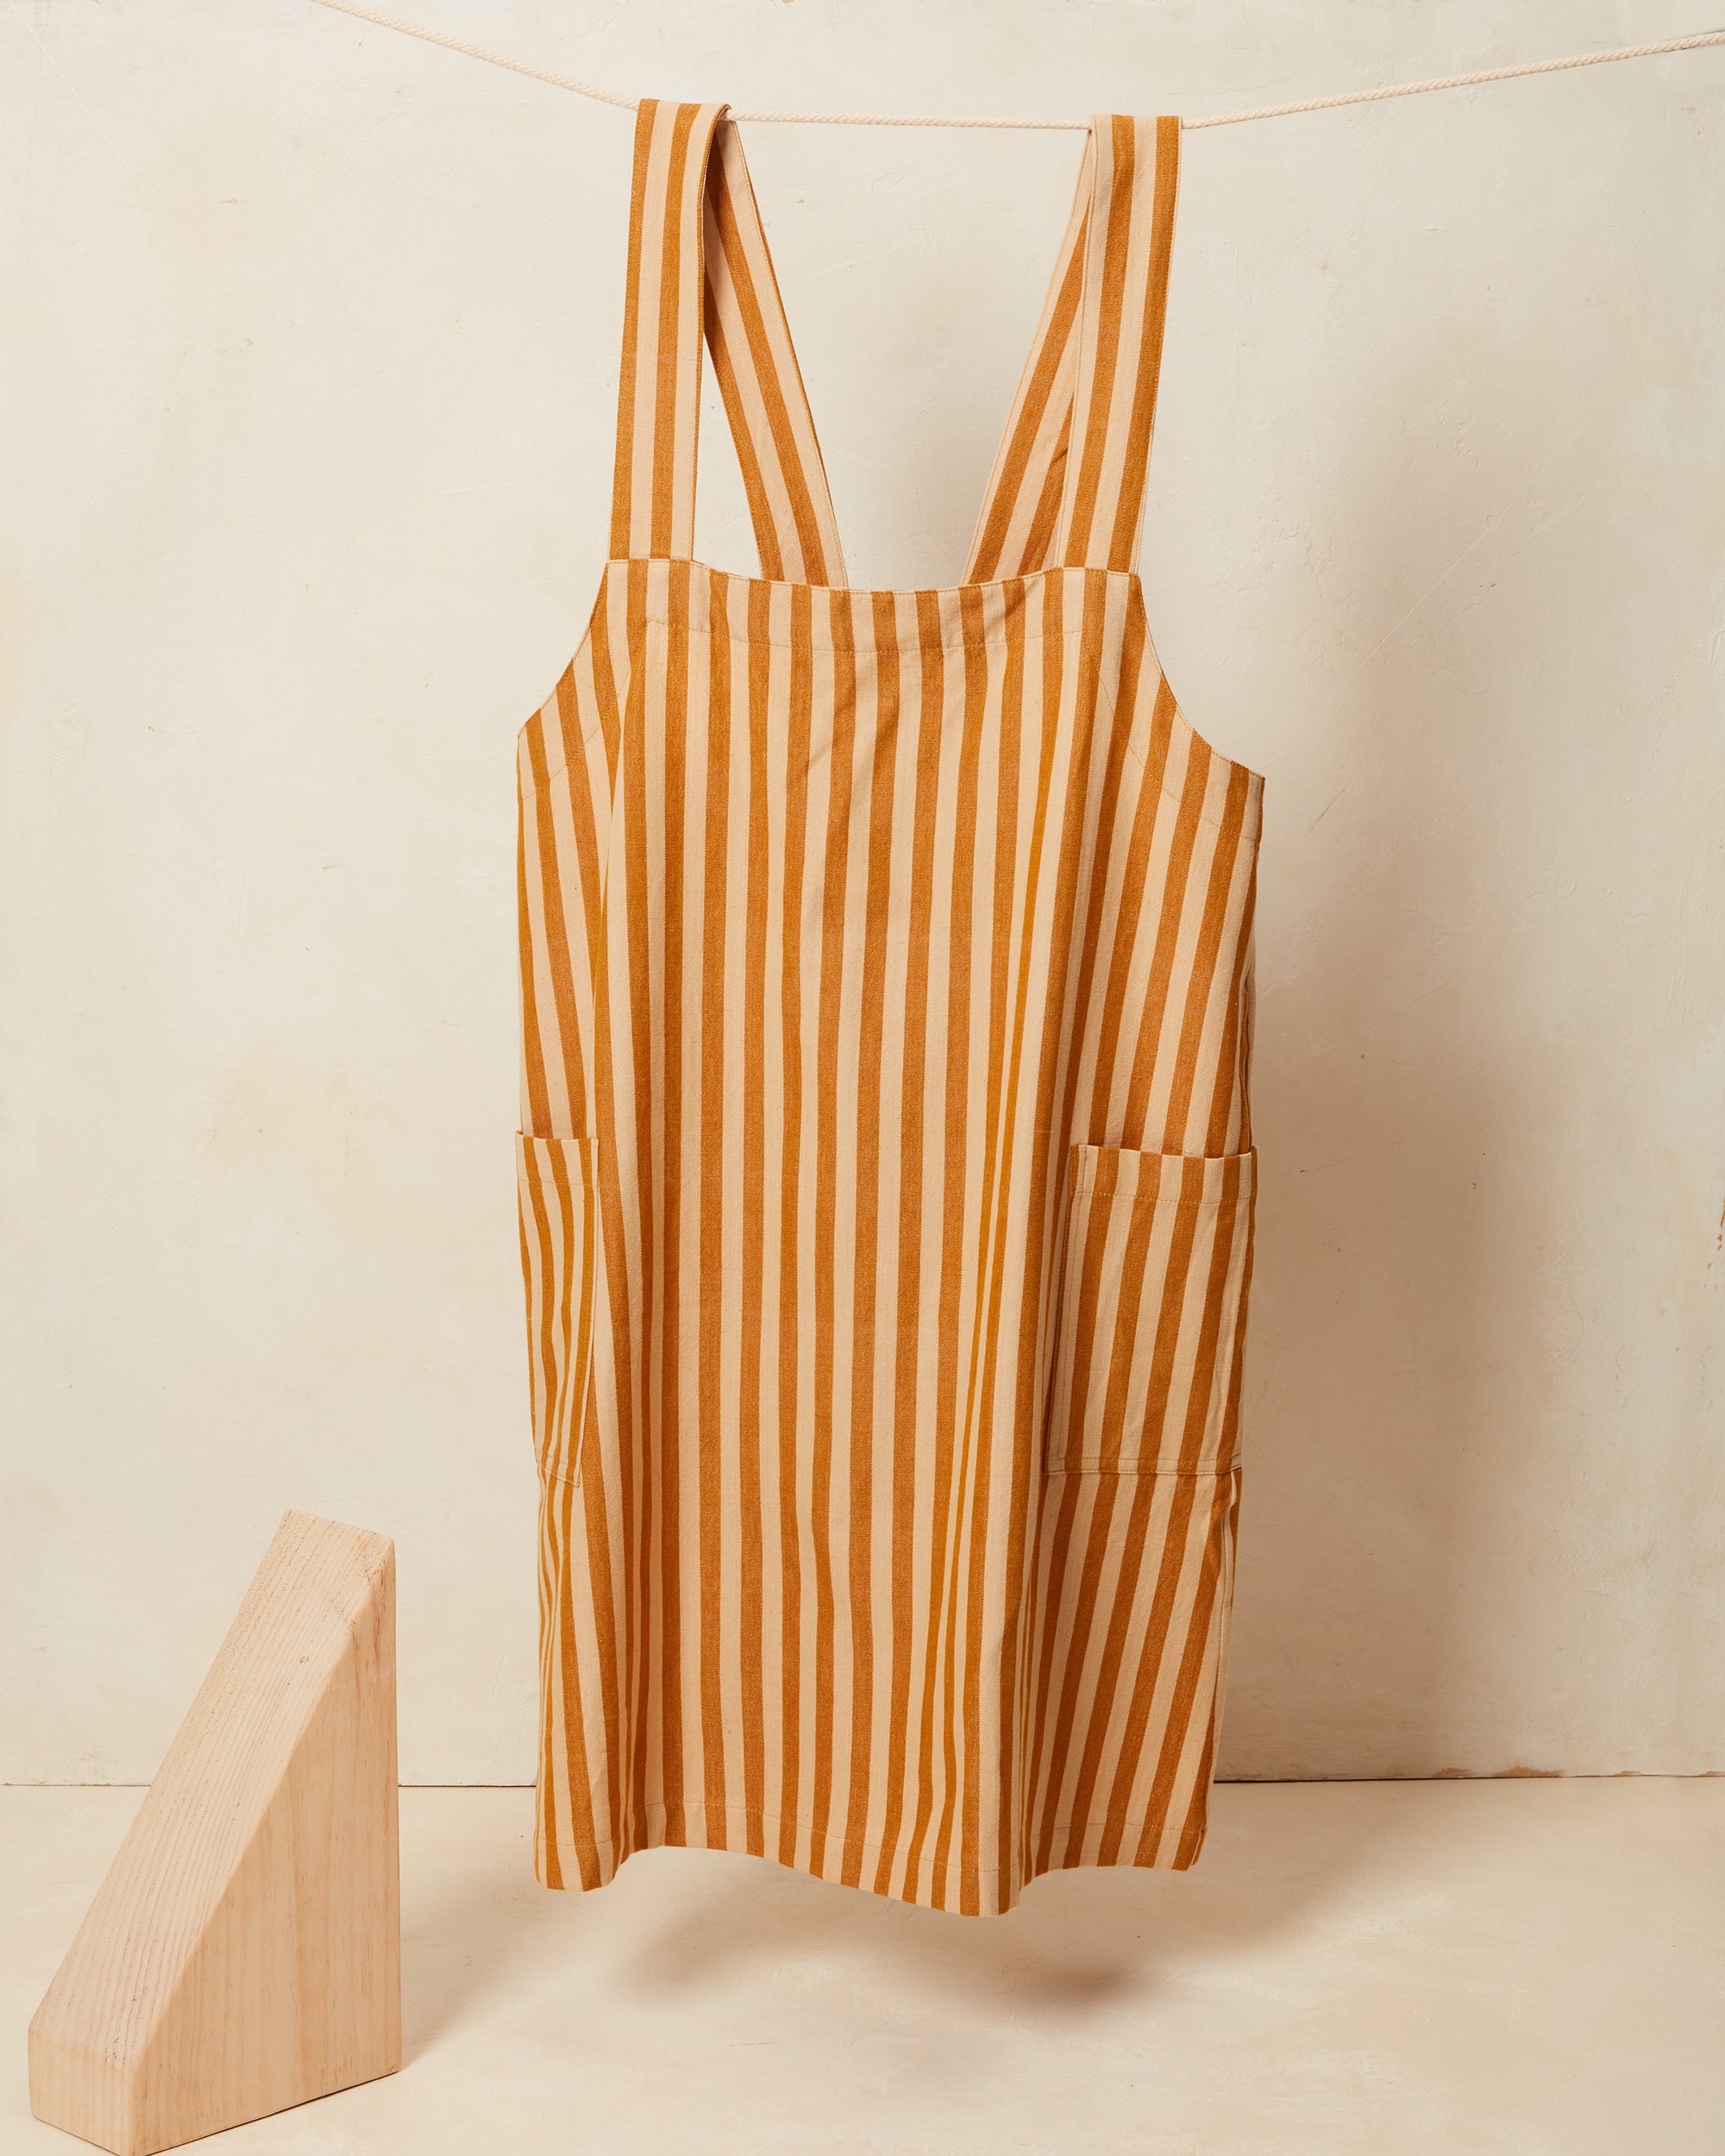 https://cdn.shopify.com/s/files/1/0918/1474/products/Utility-Apron-Beige-styled_2000x.jpg?v=1625605394